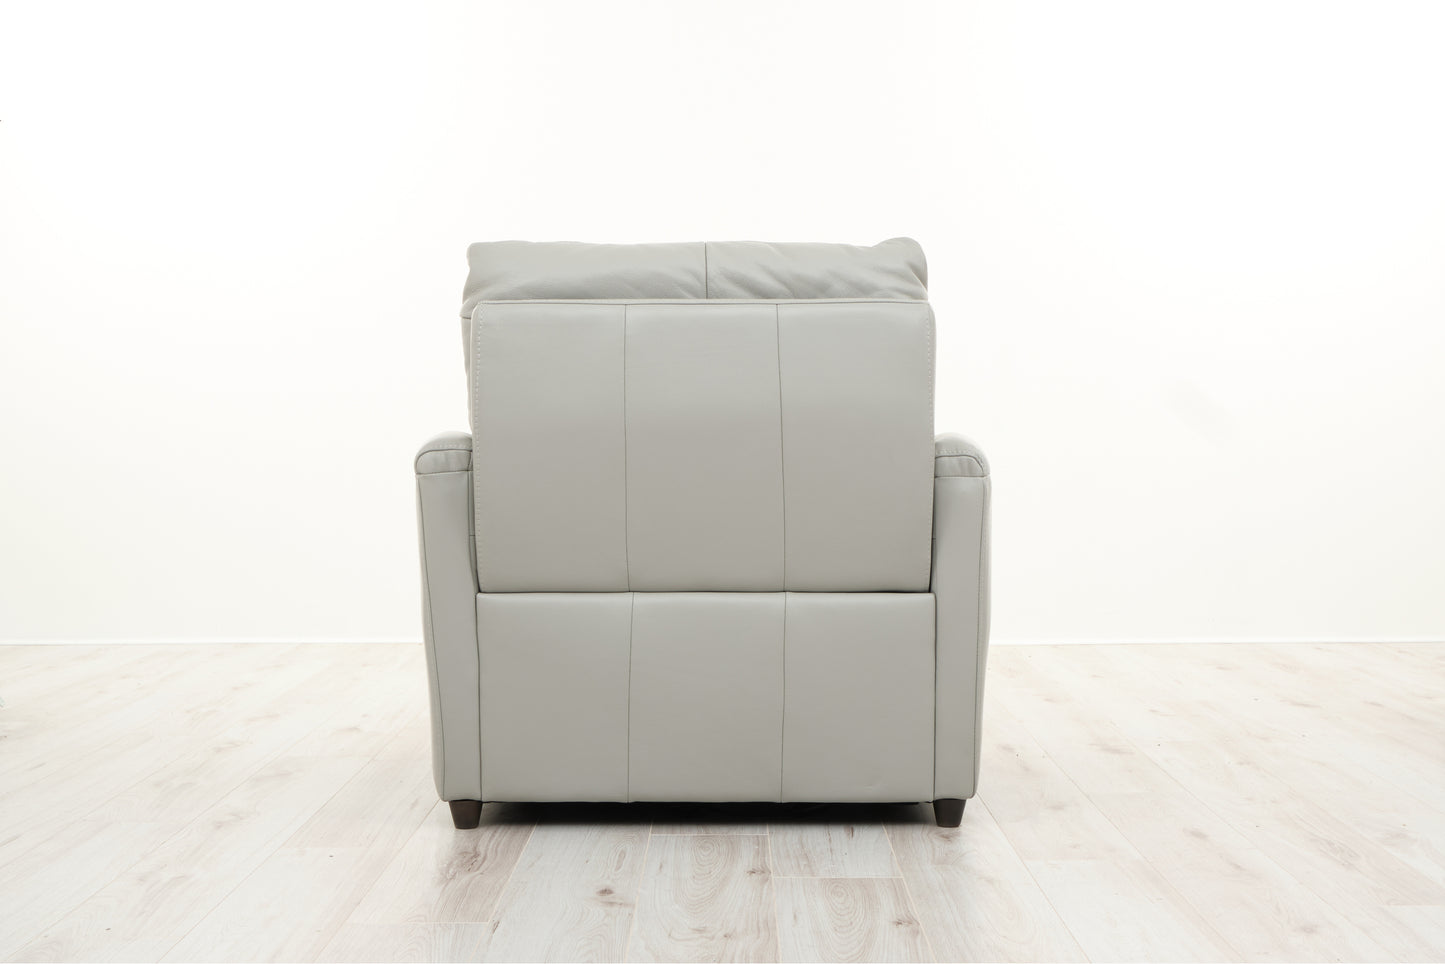 NAPLES POWERED RECLINER CHAIR